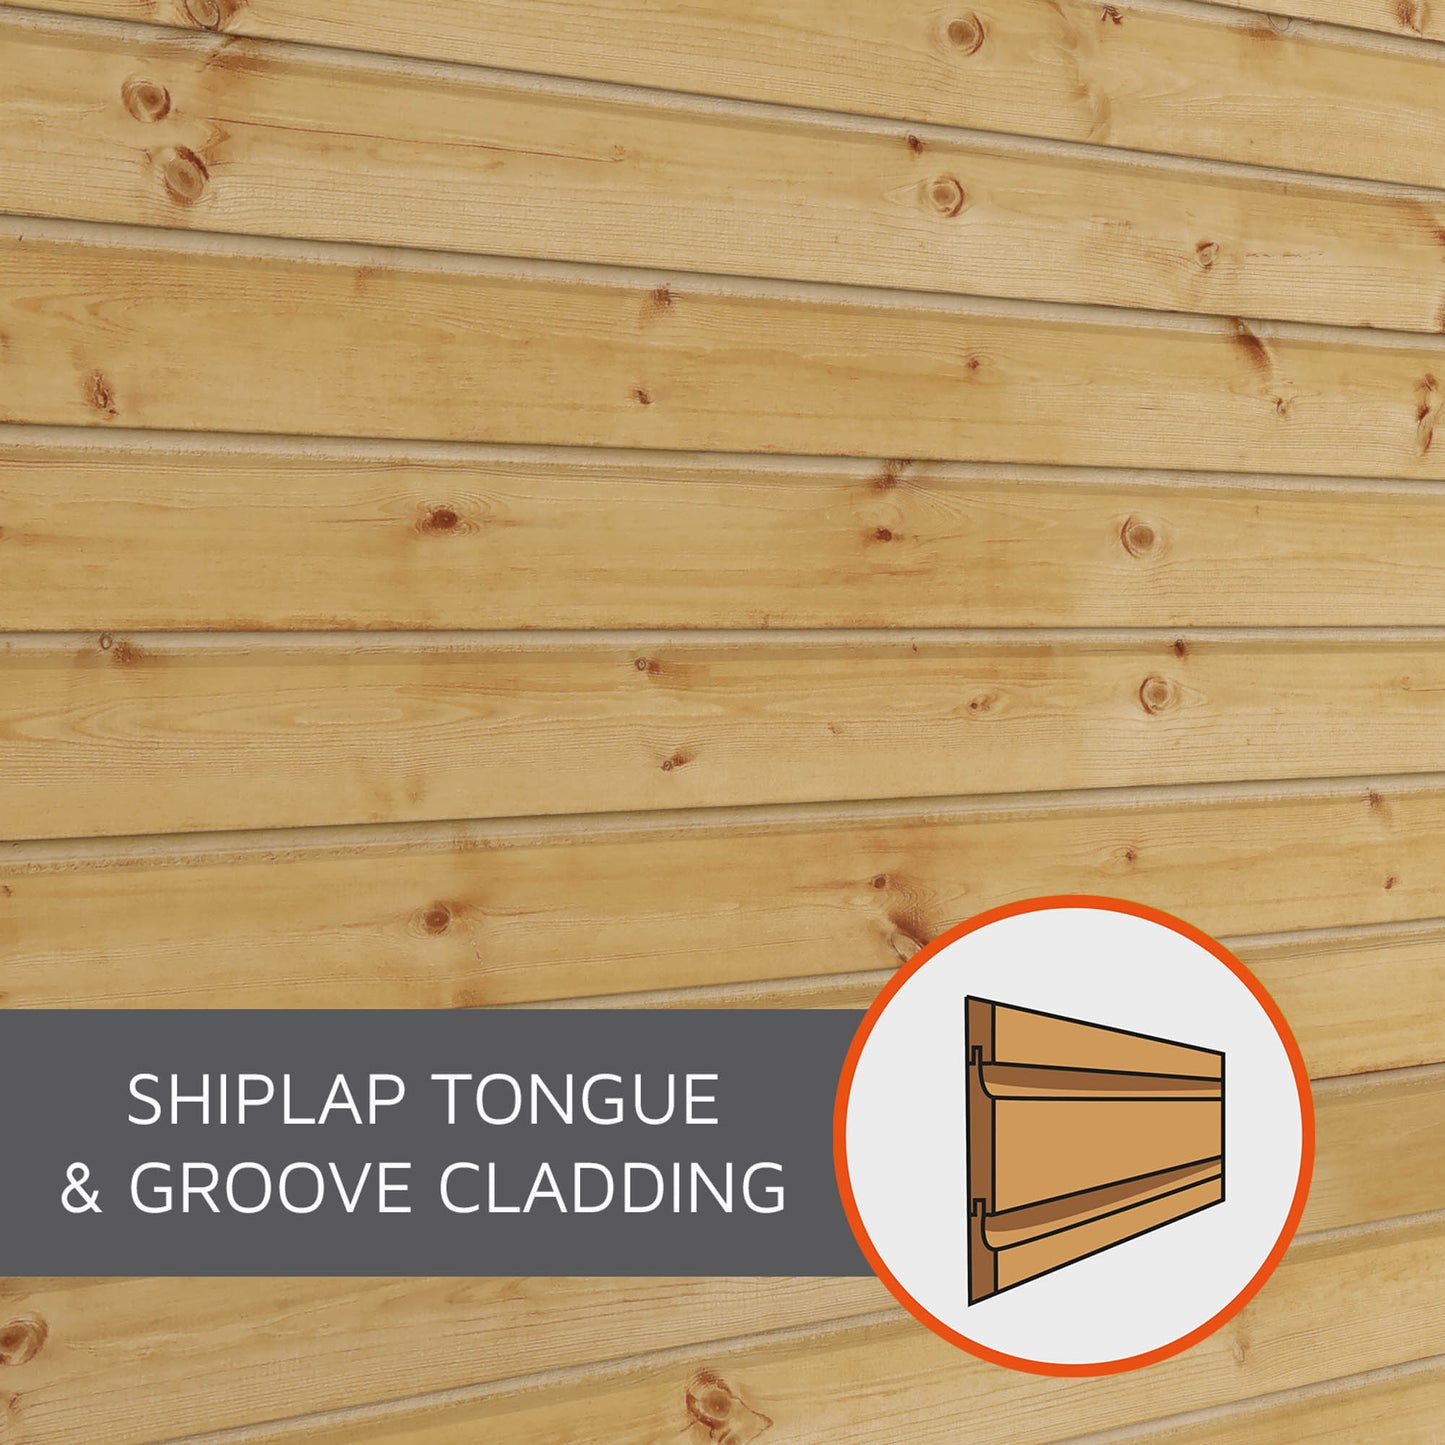 6 x 4 Shiplap Reverse Apex Wooden Shed